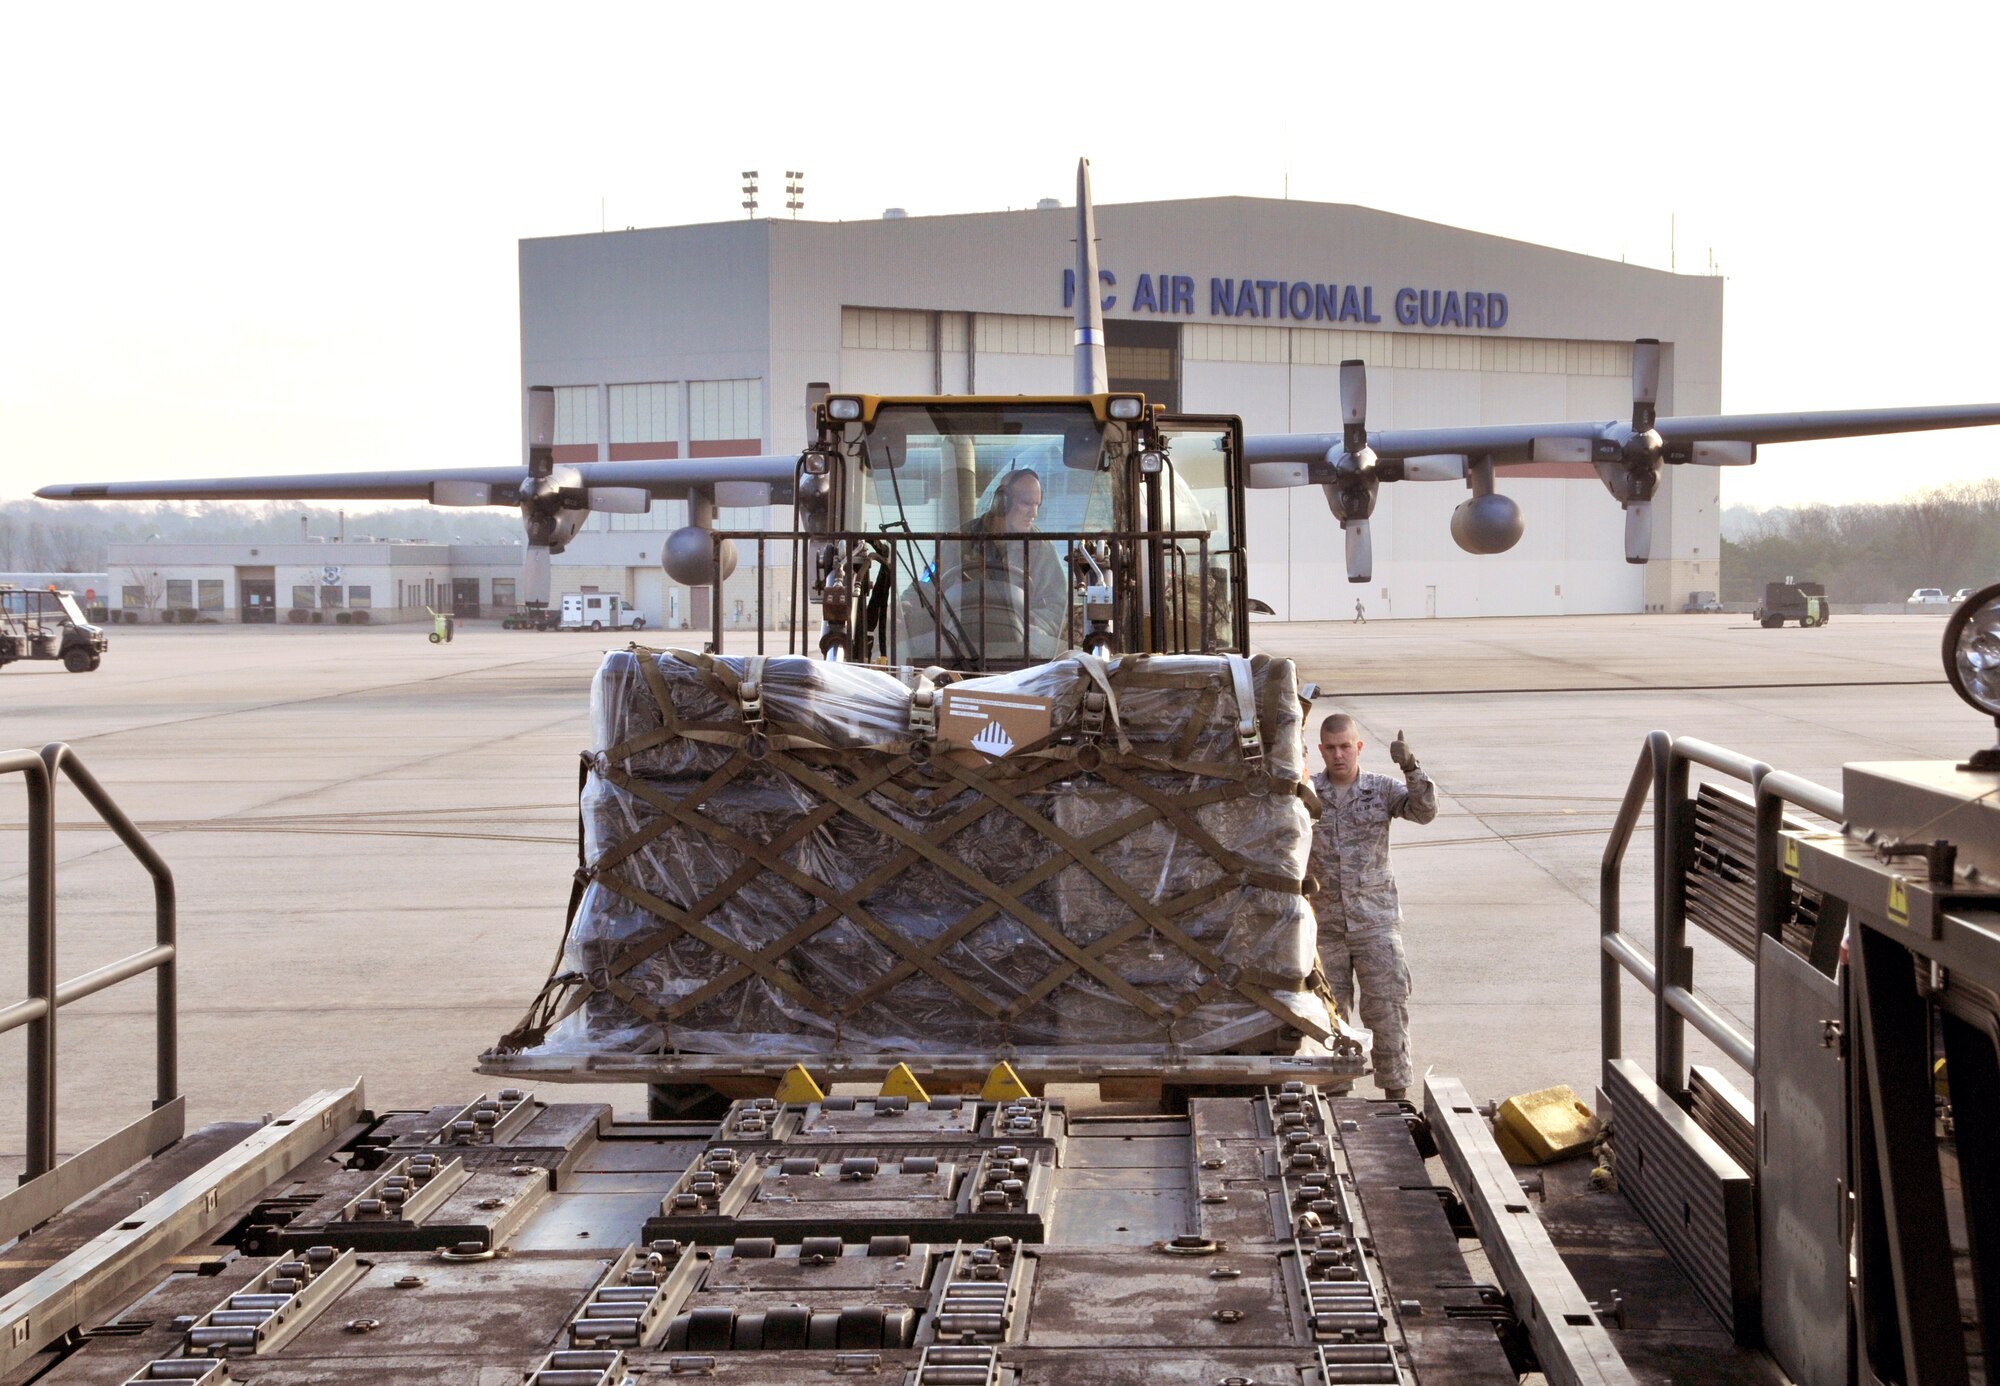 U.S. Air Force Tech. Sgt. Phillip Harrell and Staff Sgt. Jesse Huneycutt, 145th Logistics Readiness Squadron, Air Transportation Specialists, use a K-Loader and 10k All Terrain forklift to load pallets containing dental and medical supplies onto a C-130 Hercules aircraft at the North Carolina Air National Guard base, Charlotte Douglas Intl. airport, February 20, 2014. The 145th Airlift Wing prepares a flight bound for Louisiana in support of Cajun Care 2014, a Department of Defense, Innovative Readiness Training mission designed to provide U.S. military medical professionals invaluable training as well as provide health care options to a medically underserved community. (U.S. Air National Guard photo by Master Sgt. Patricia F. Moran, 145th Public Affairs/Released)